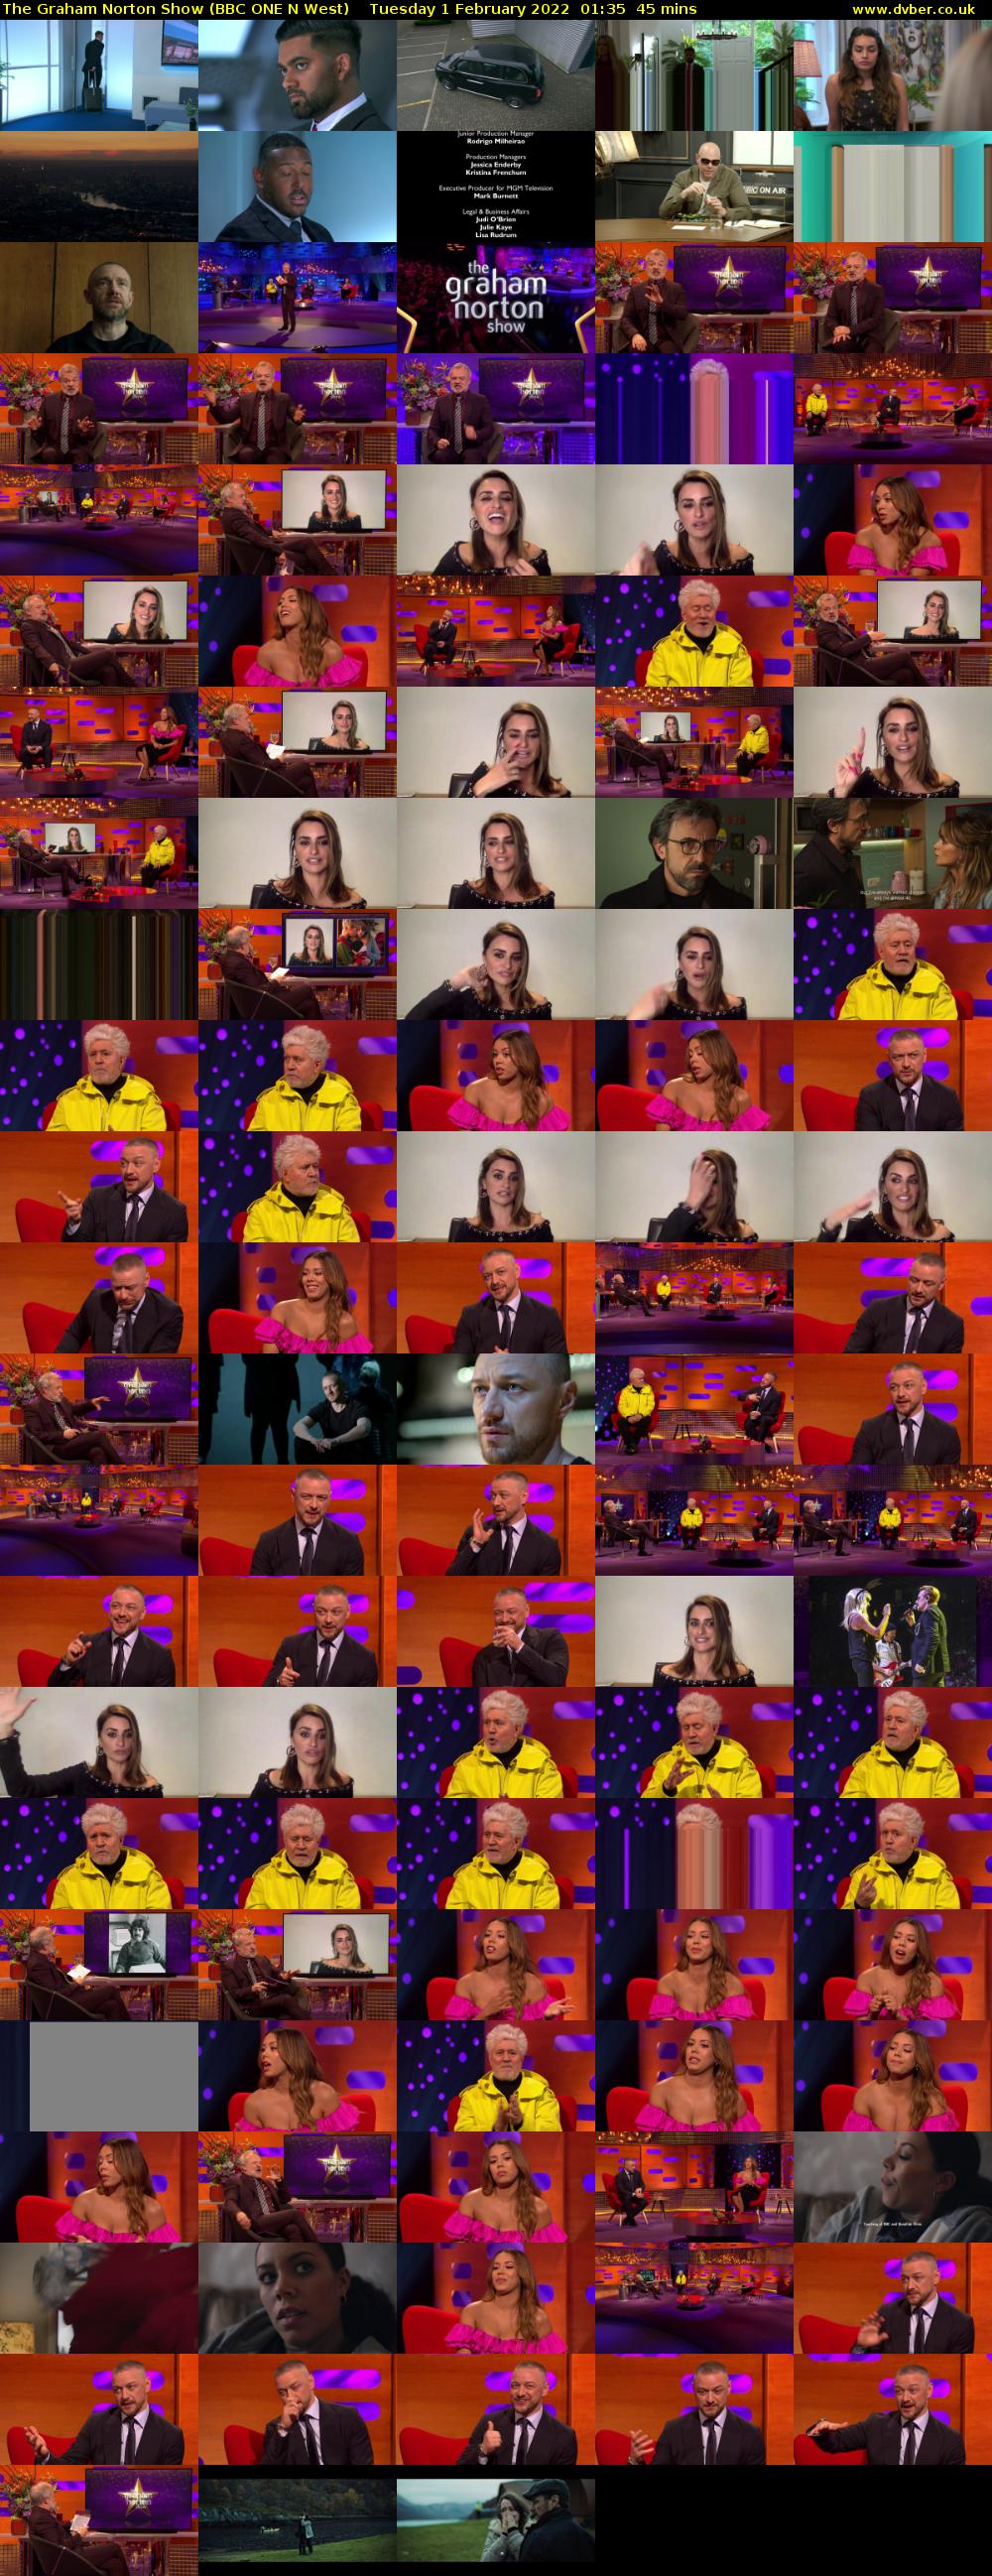 The Graham Norton Show (BBC ONE N West) Tuesday 1 February 2022 01:35 - 02:20